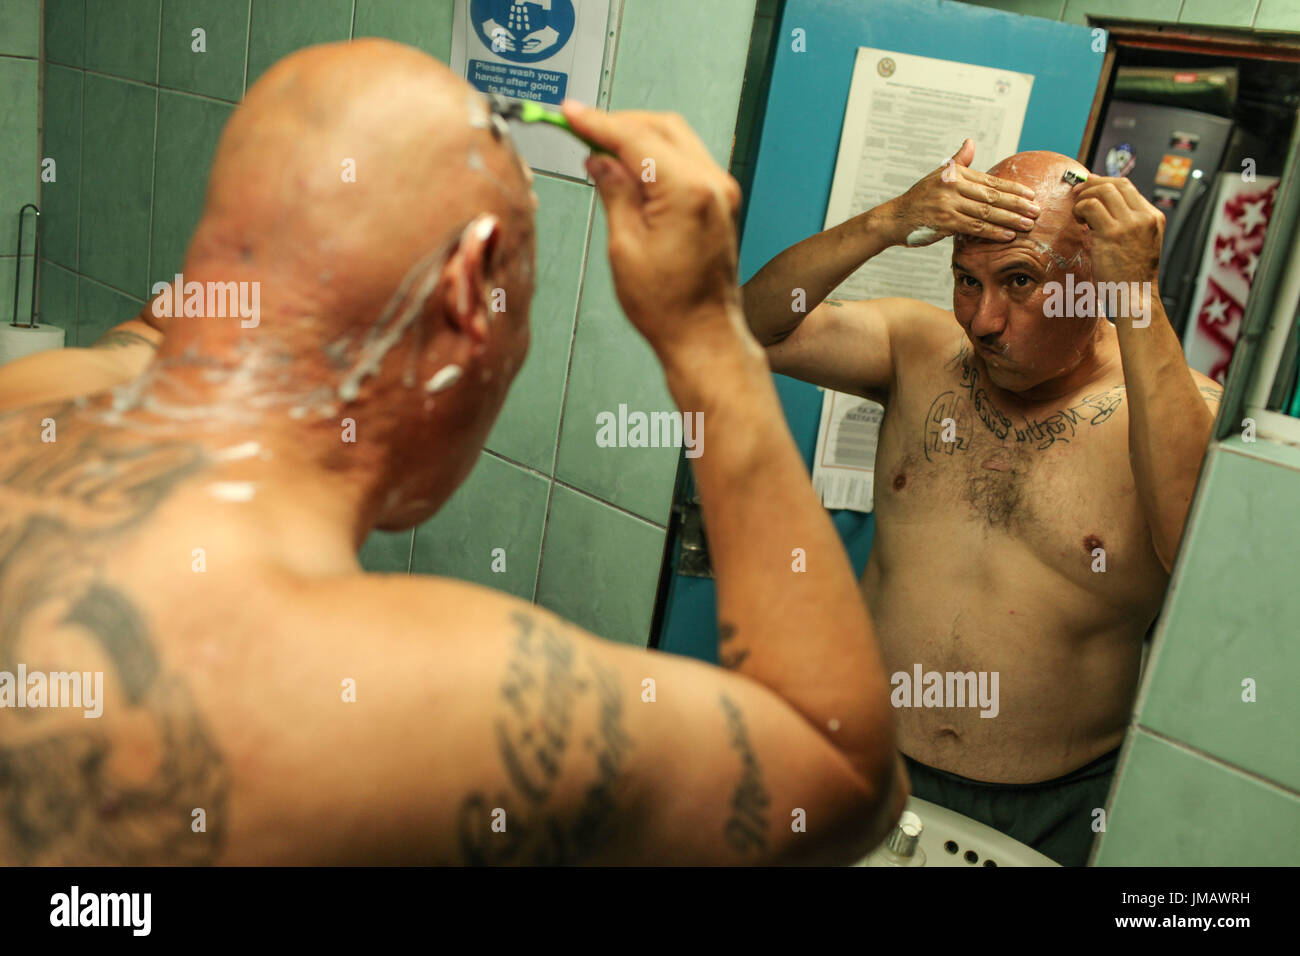 Tijuana, Baja California, Mexico. 7th July, 2017. HECTOR BARAJAS-VARELA, a deported U.S. Army veteran, shaves his head as part of his hygiene routine at the Deported Veterans Support House in Tijuana, Baja California, Mexico. Credit: Joel Angel Juarez/ZUMA Wire/Alamy Live News Stock Photo